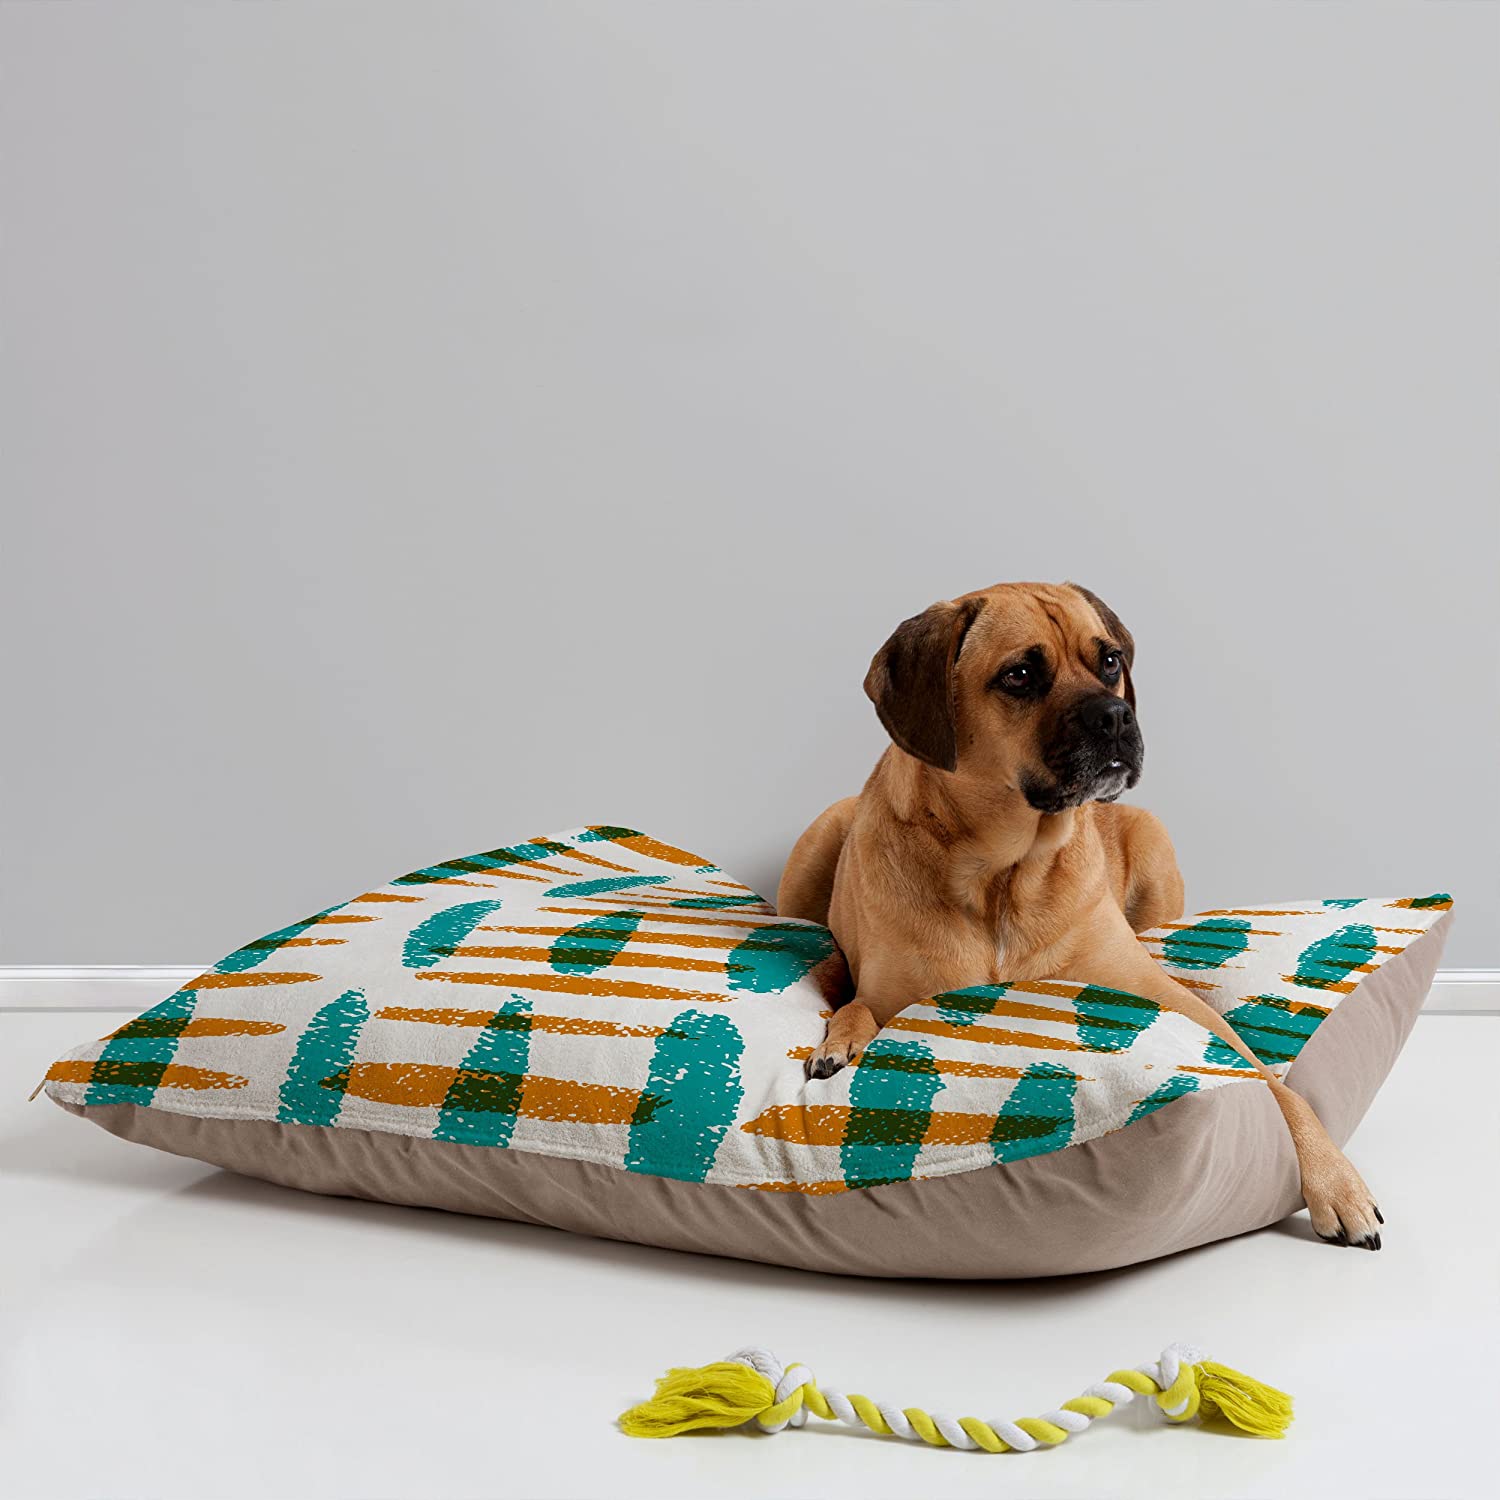 Doggie-pillow-1 +80 Adorable Dog Bed Designs That Will Surprise You